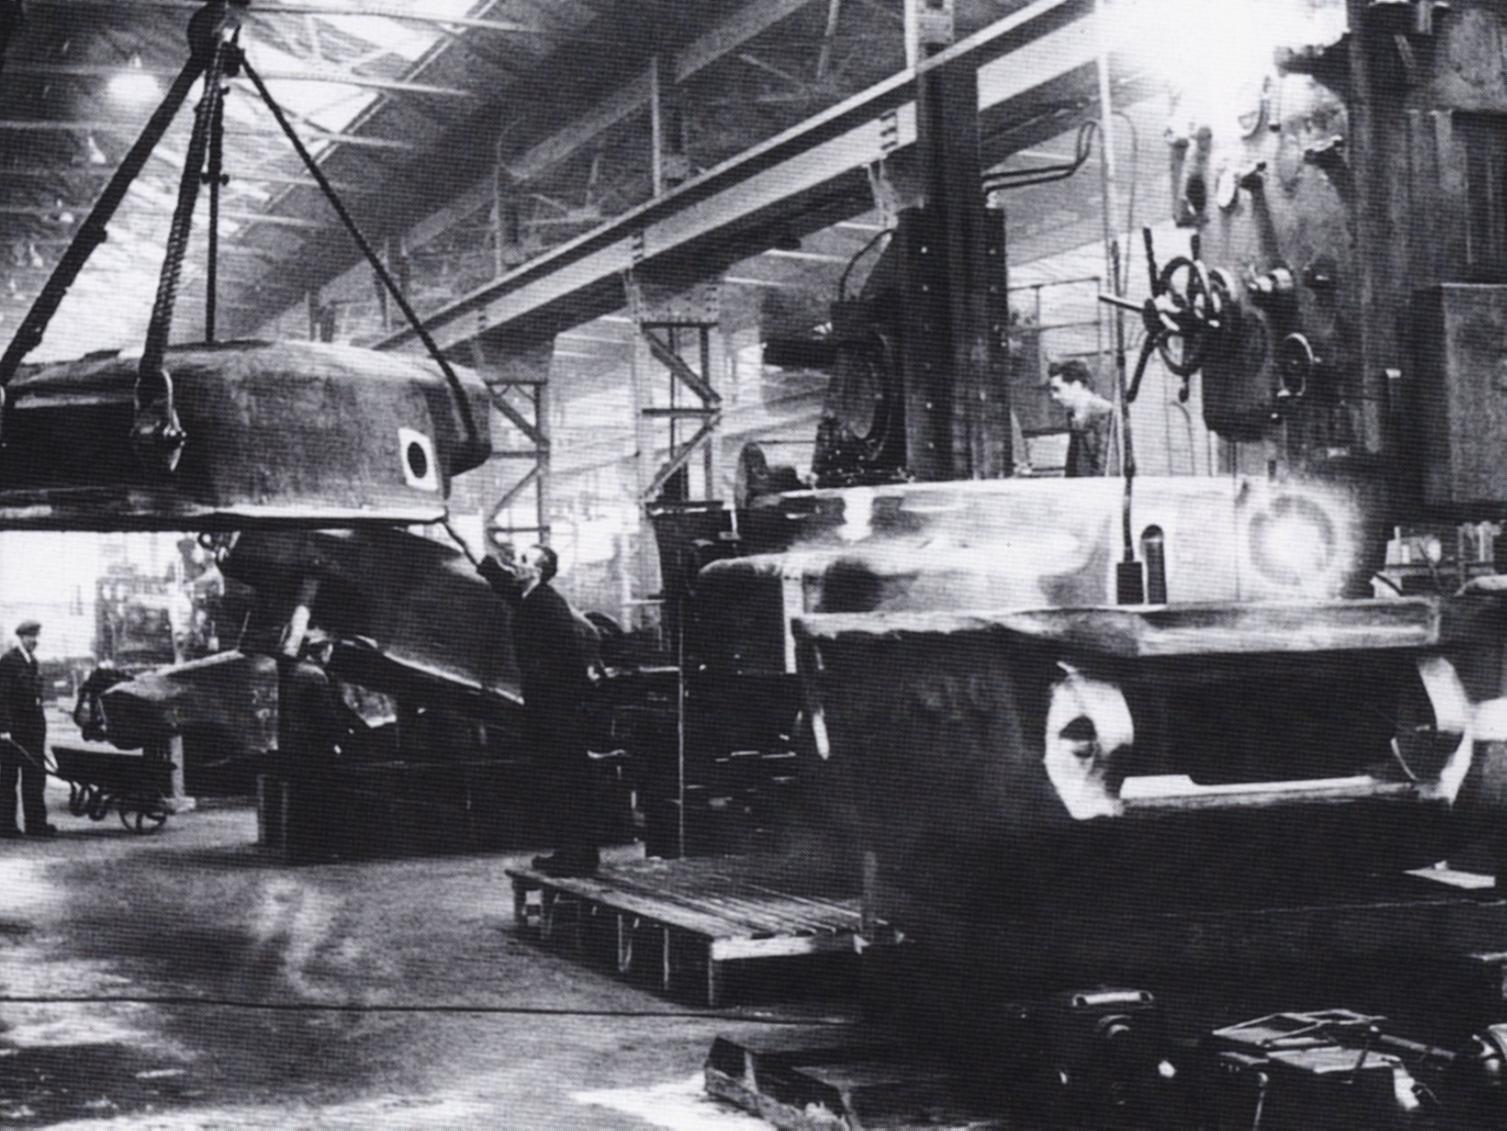 Production of the centurion tank.